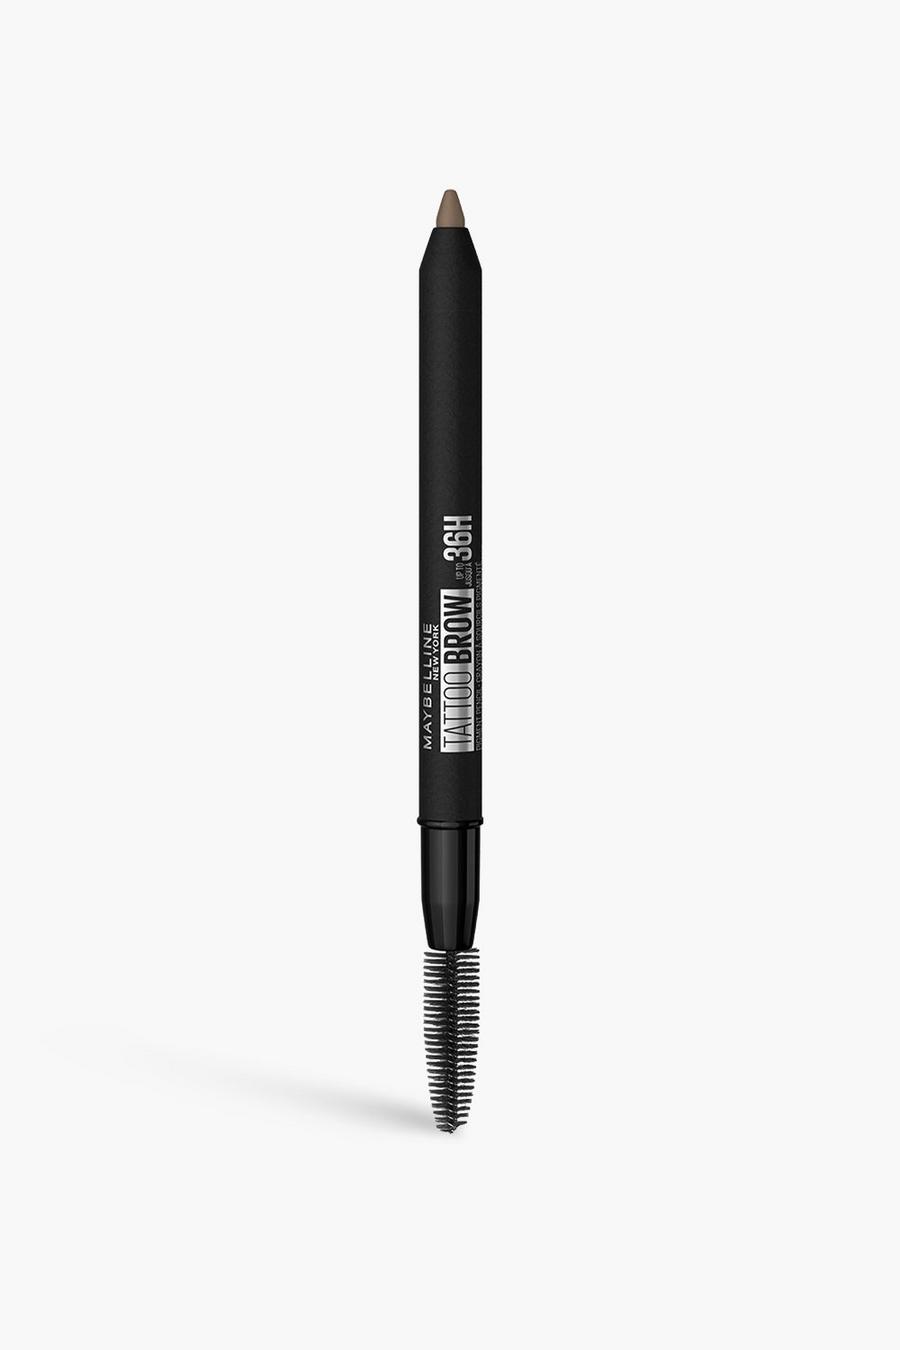 Maybelline Tattoo Brow Semi Perm Blonde 02 image number 1